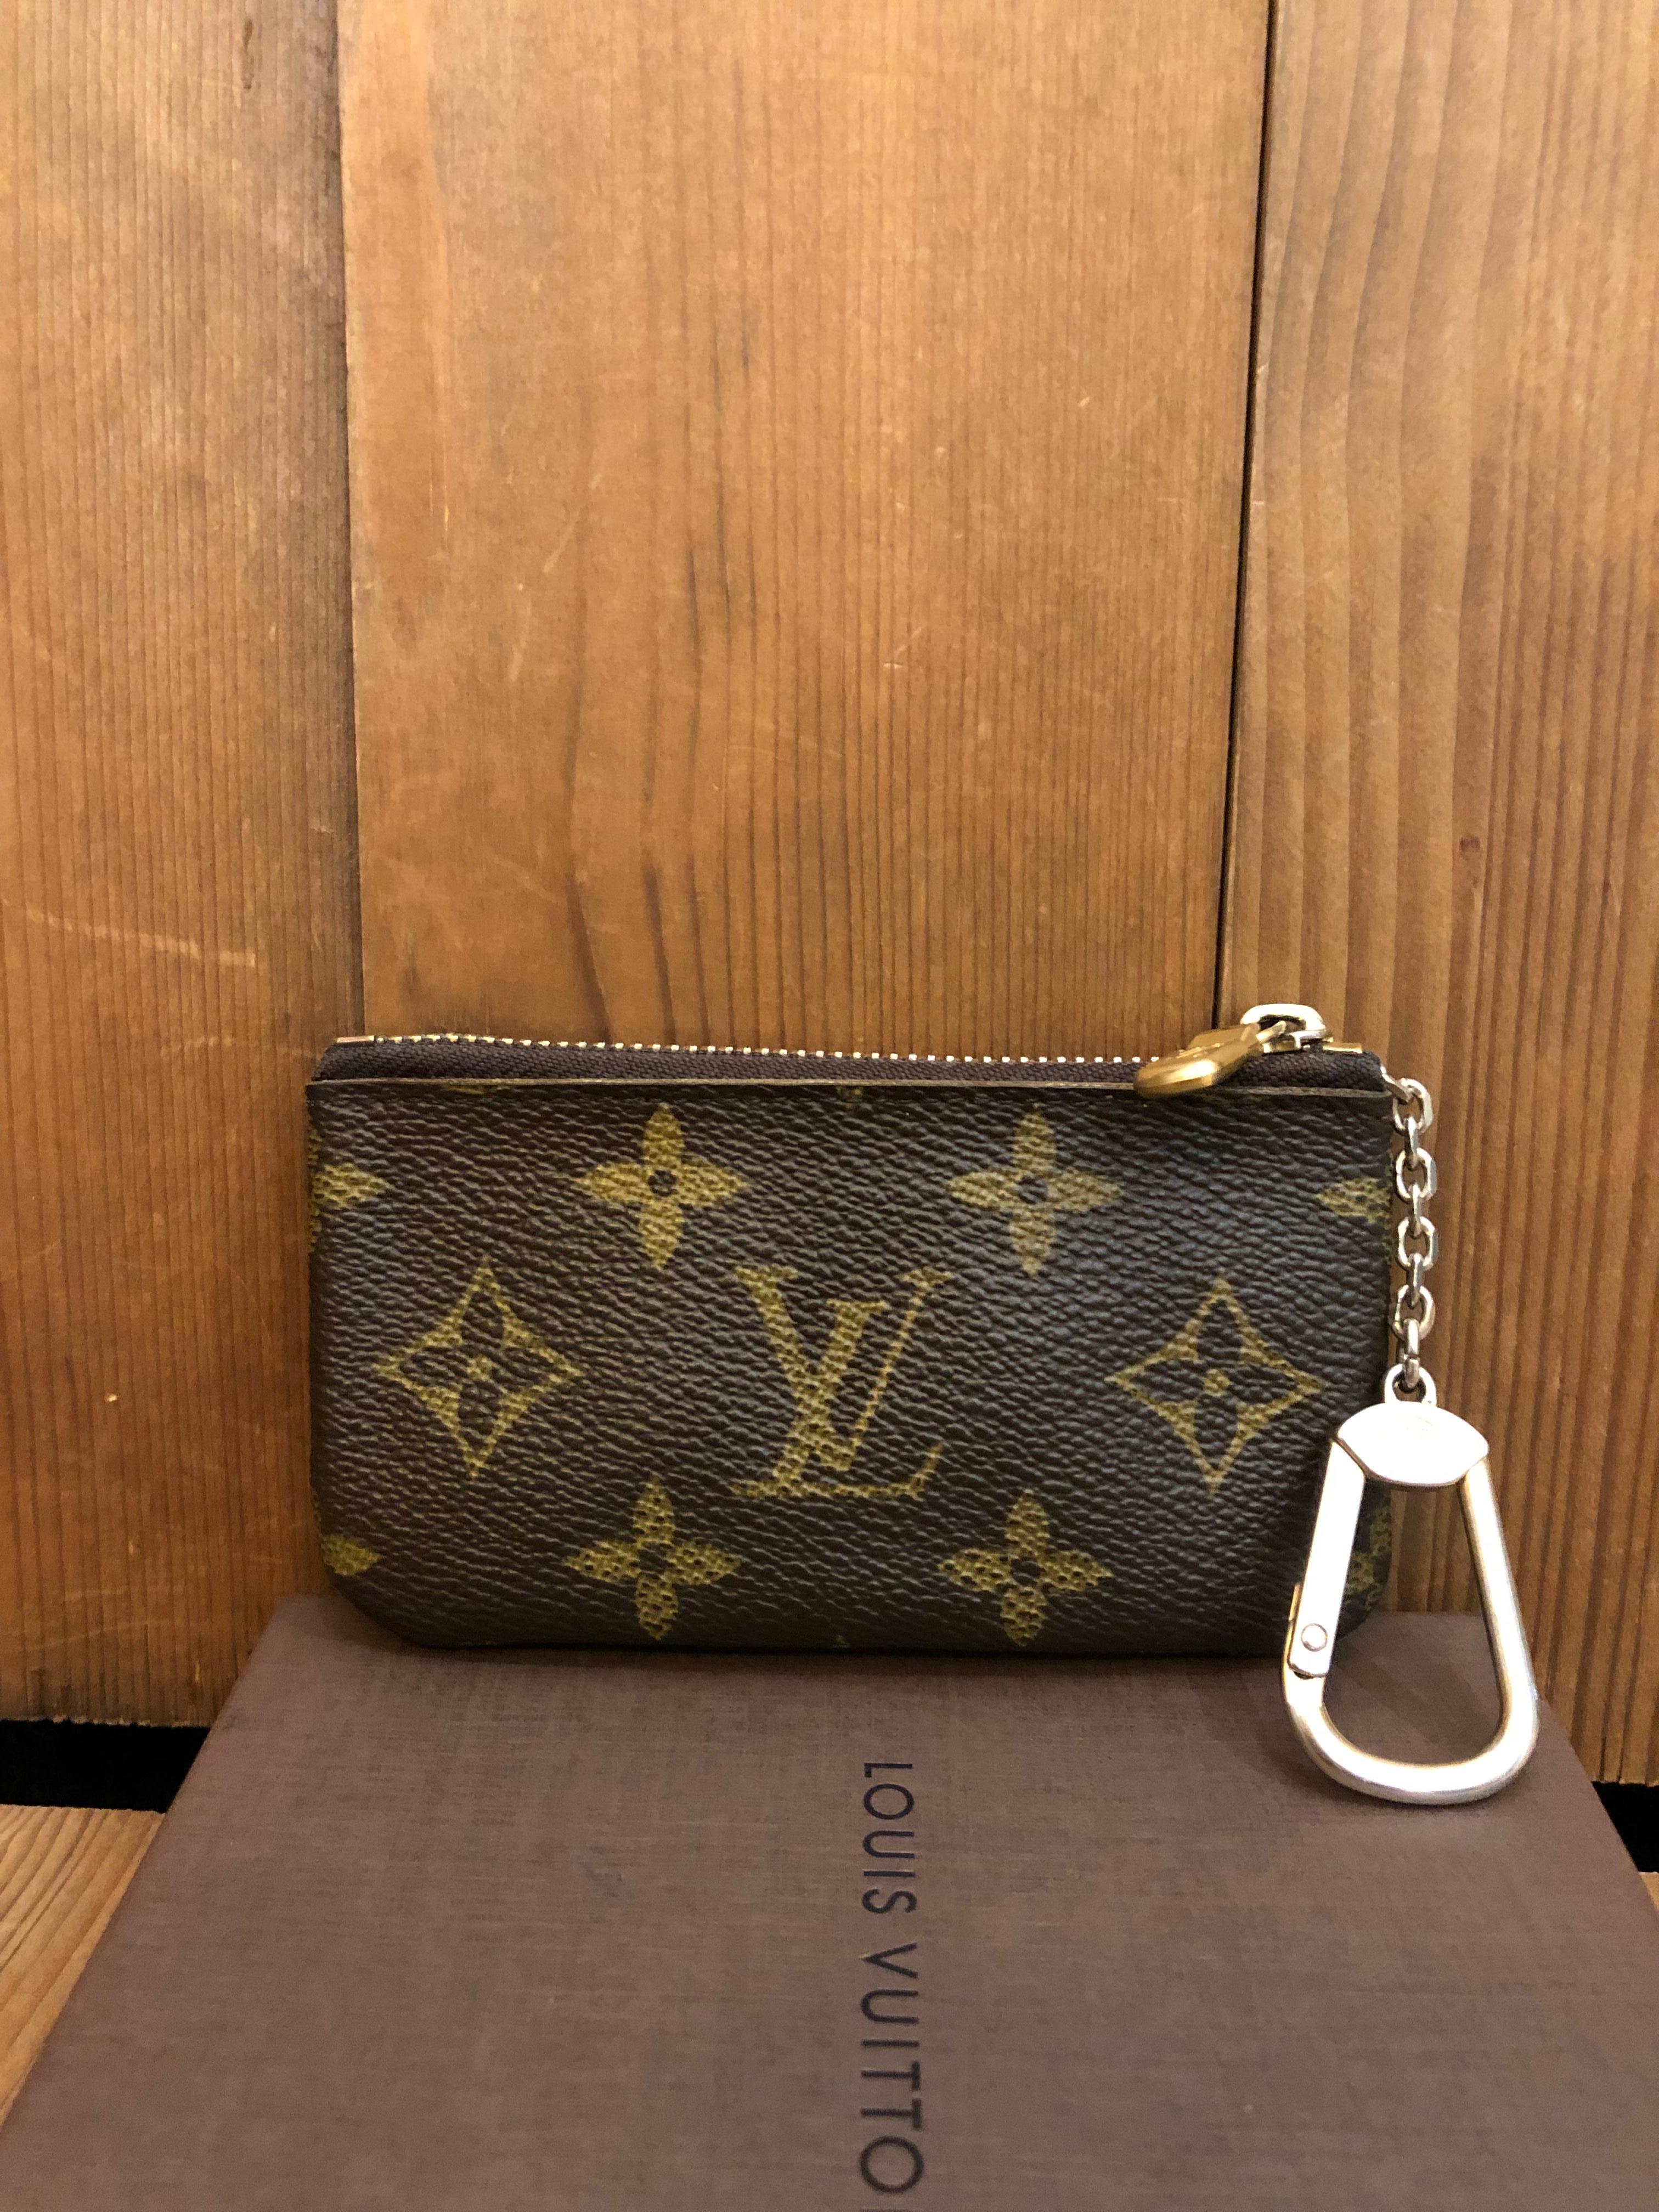 This LOUIS VUITTON key coin pouch is crafted of Louis Vuitton coated monogram canvas lined with terracotta cross-grain leather. A chic and very practical accessory from LOUIS VUITTON. Zipper top closure. This pouch features a D-ring clasp to secure